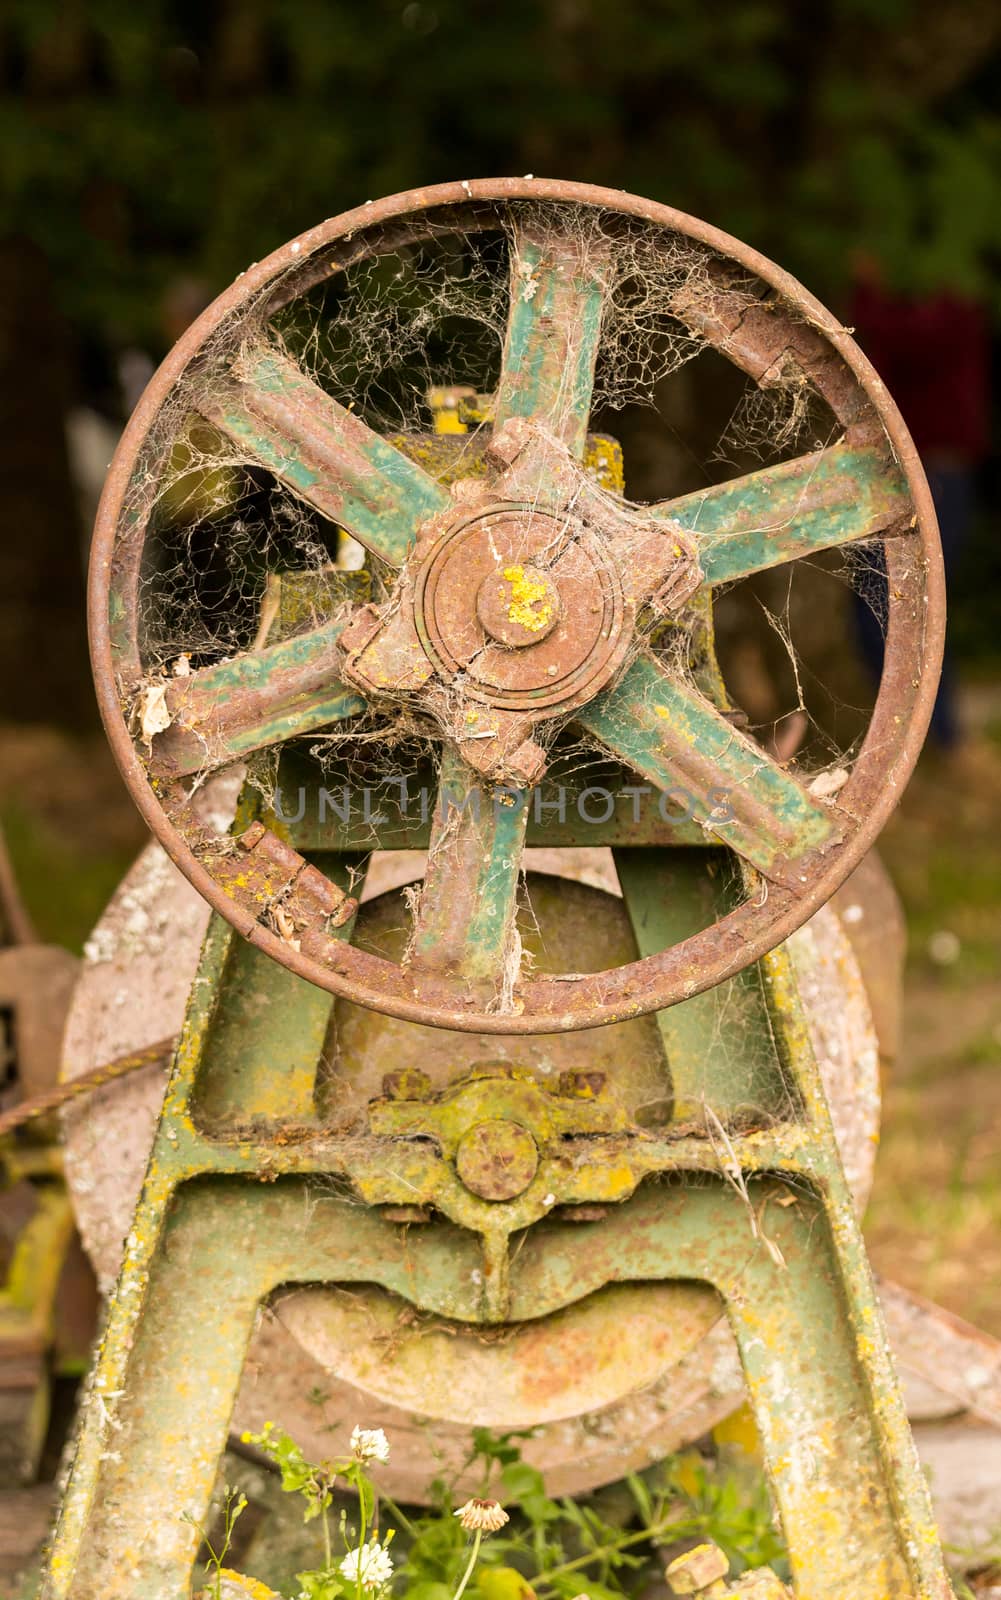 Rusty farm equipment or machinery abandoned in forest with flywheel and motor pulley